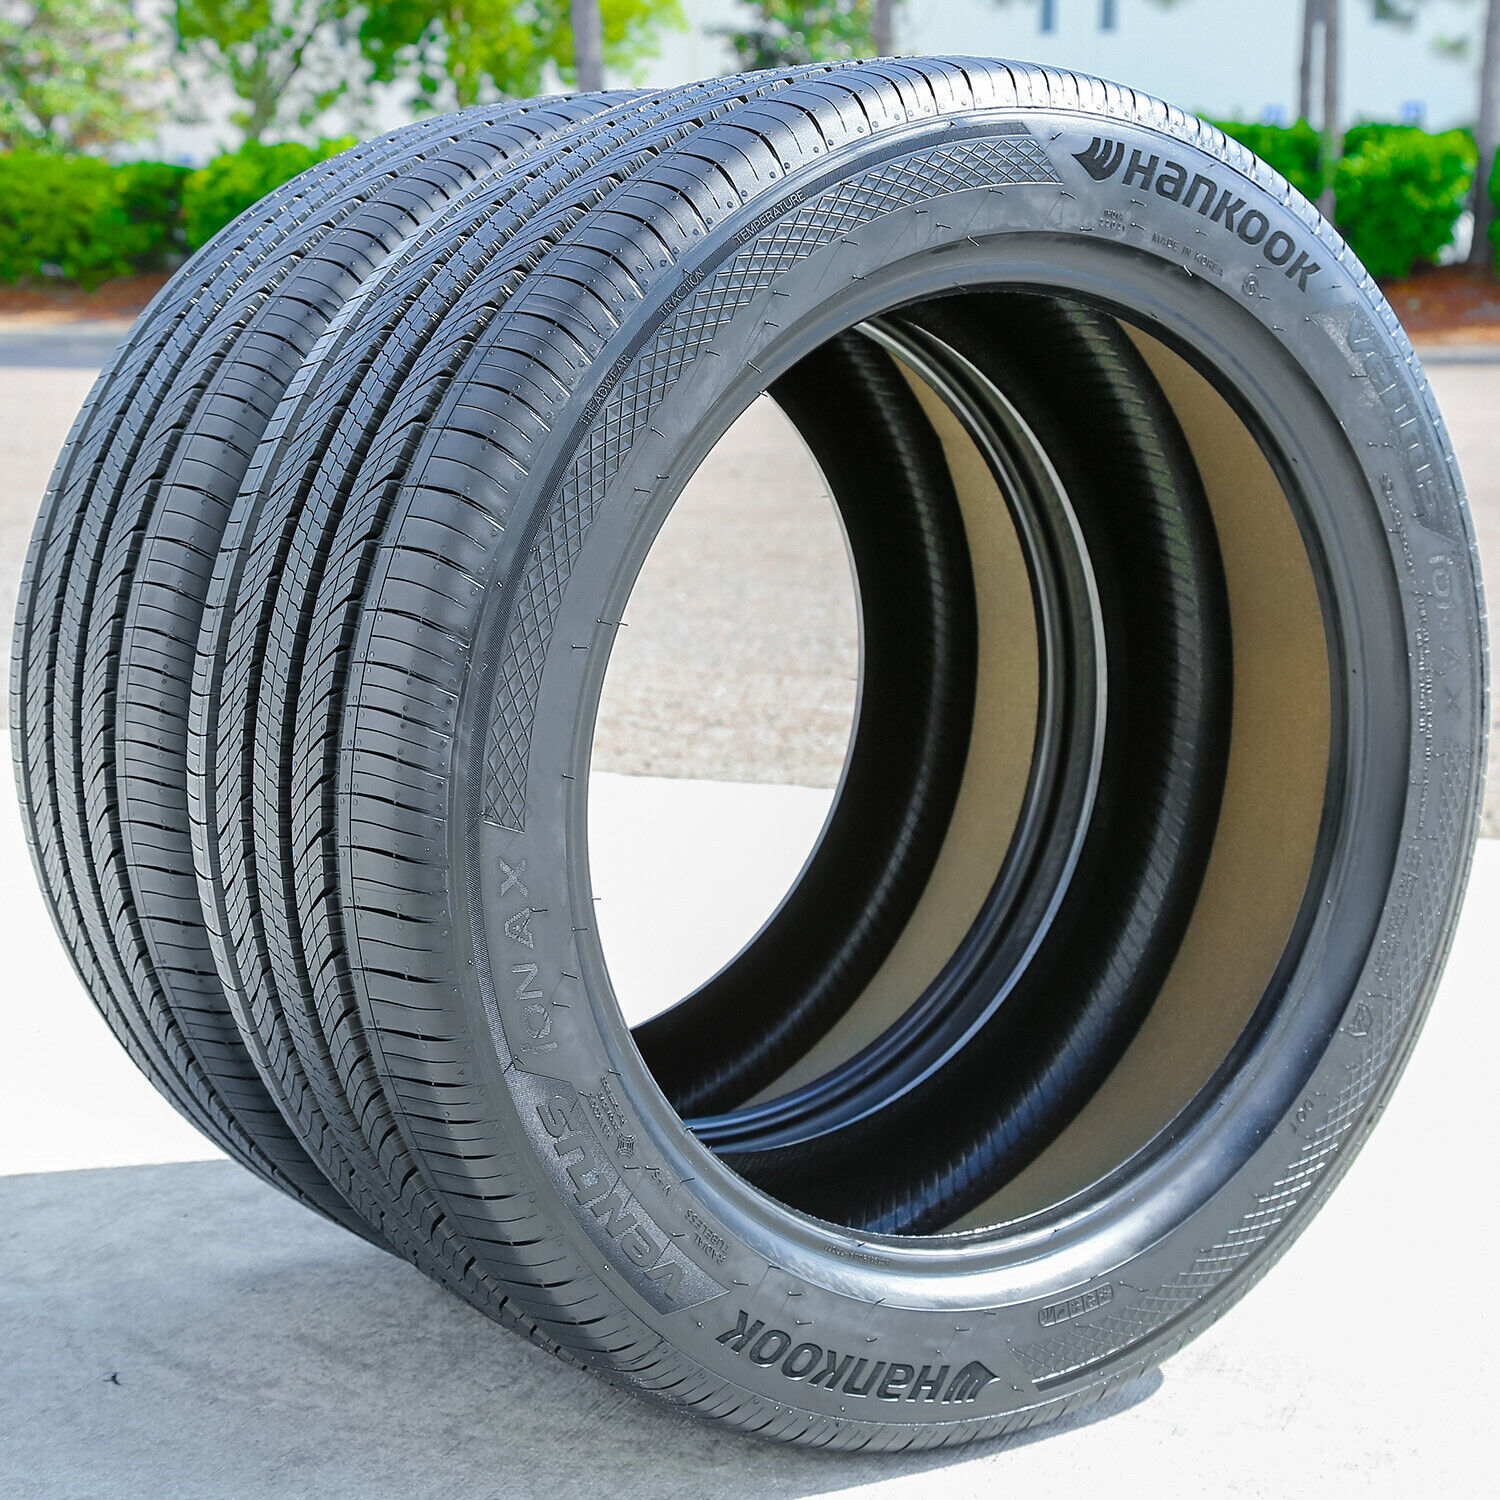 2 Tires Hankook Ventus iON AX 275/35R21 103Y XL AS A/S High Performance